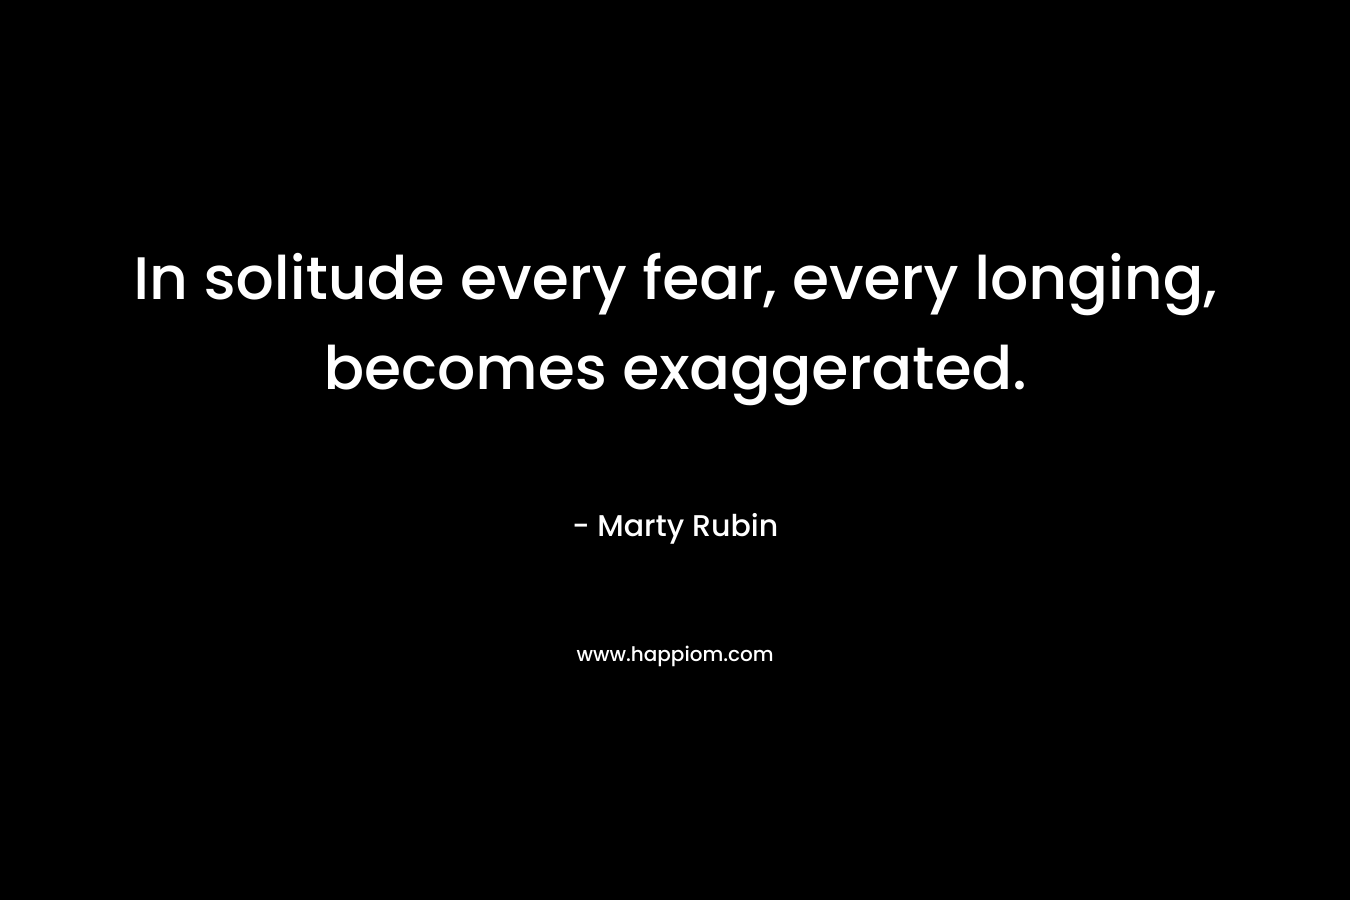 In solitude every fear, every longing, becomes exaggerated. – Marty Rubin